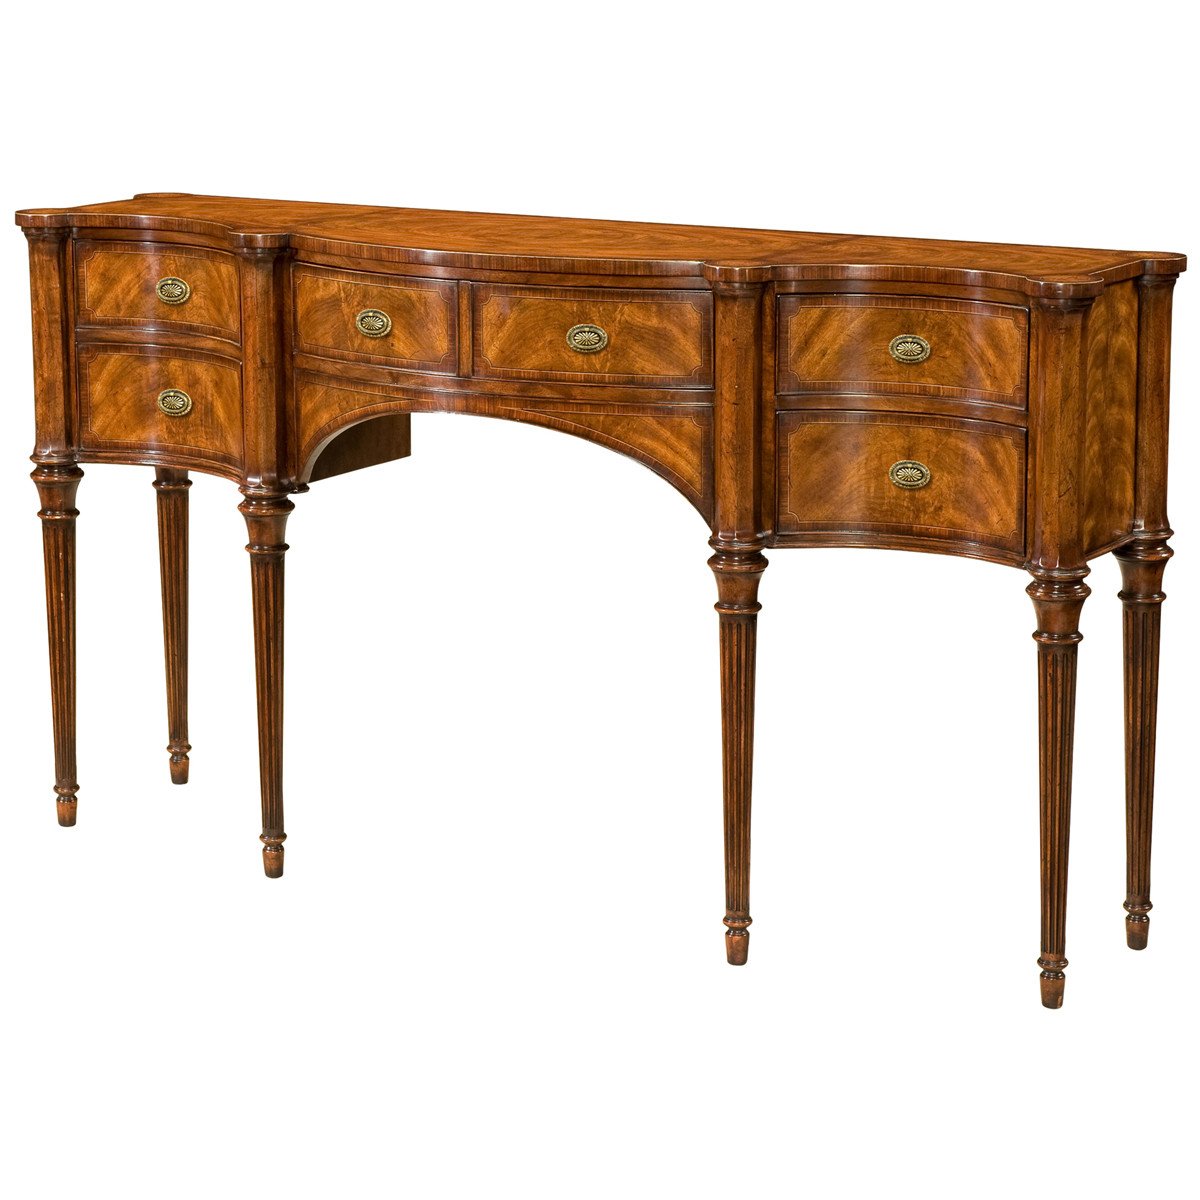 Theodore Alexander The English Cabinet Maker Stanhope Row Buffet